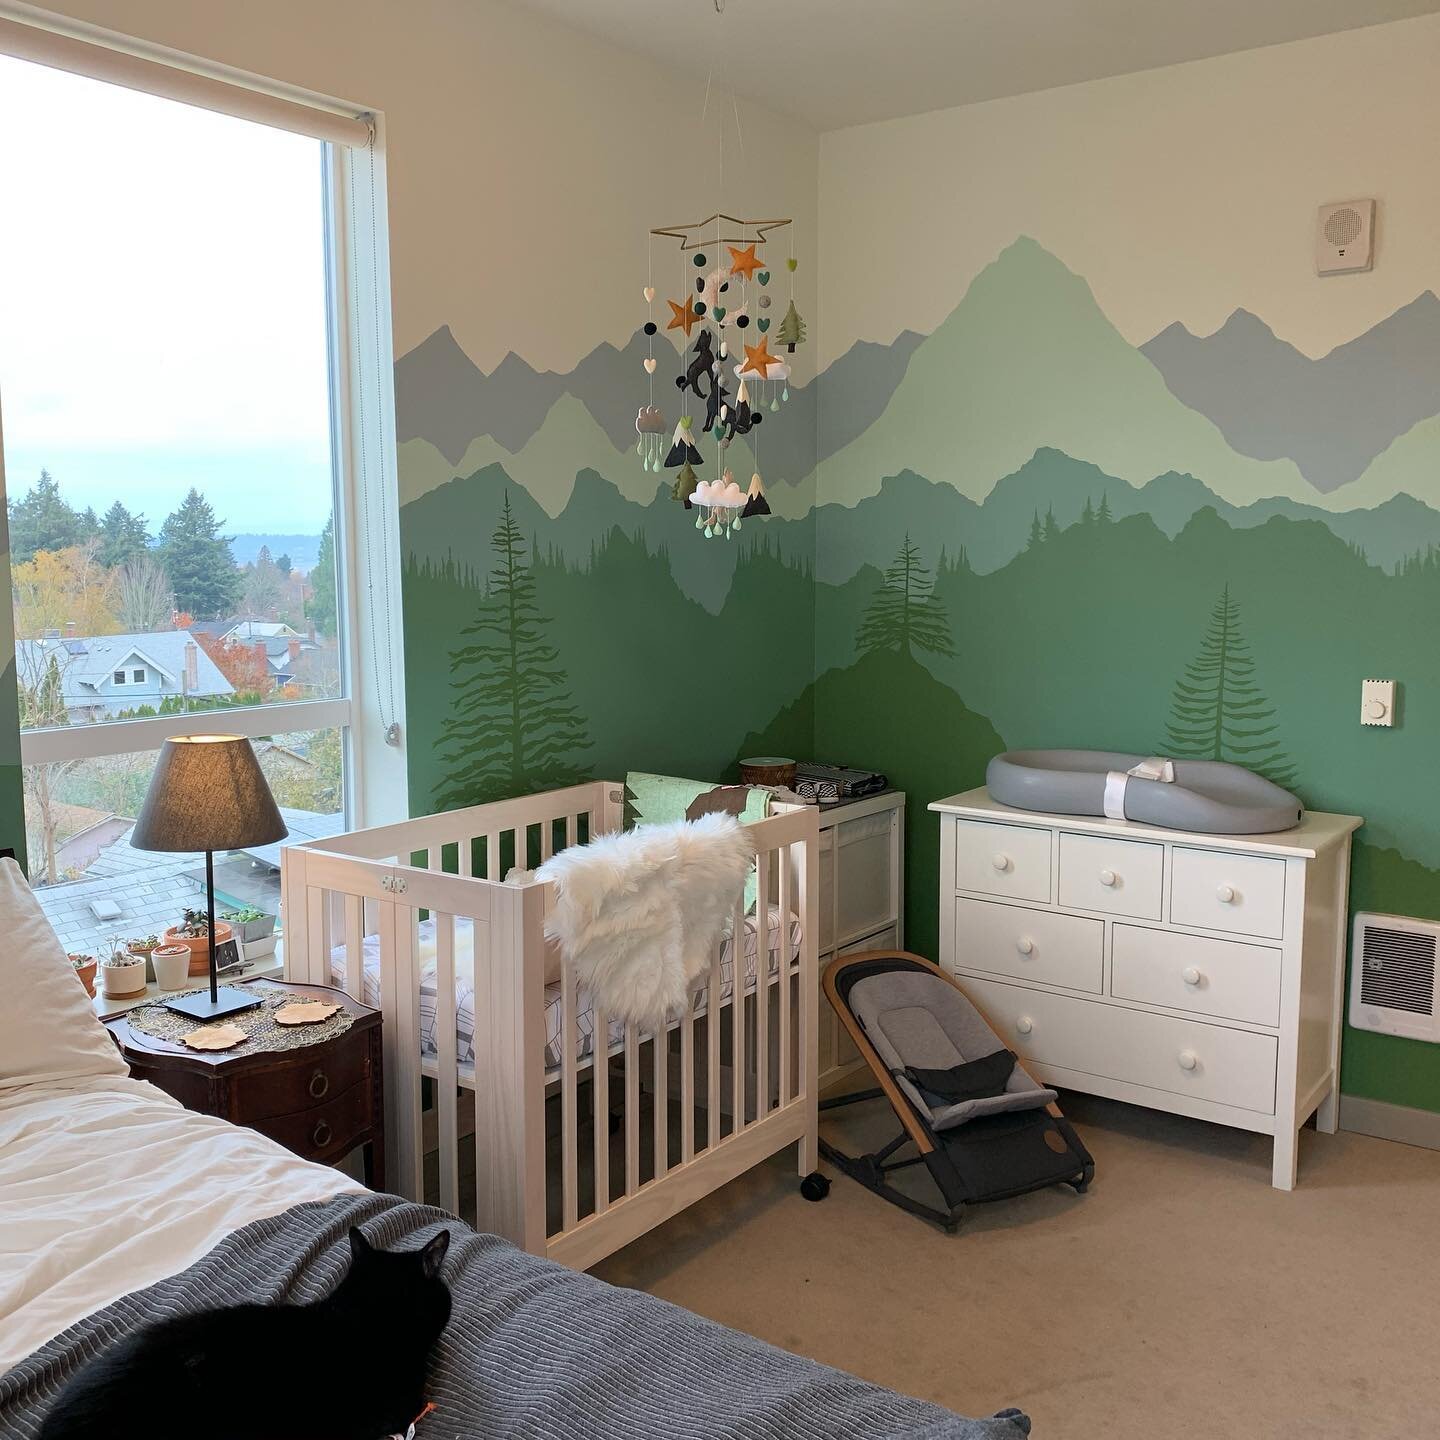 With the addition of her amazing handmade mobile yesterday, my nursery collaboration with @darlingdarkness is shaping up pretty nicely. Stoked to share some progress shots. Definitely been a while since I painted and it&rsquo;s been oddly meditative.